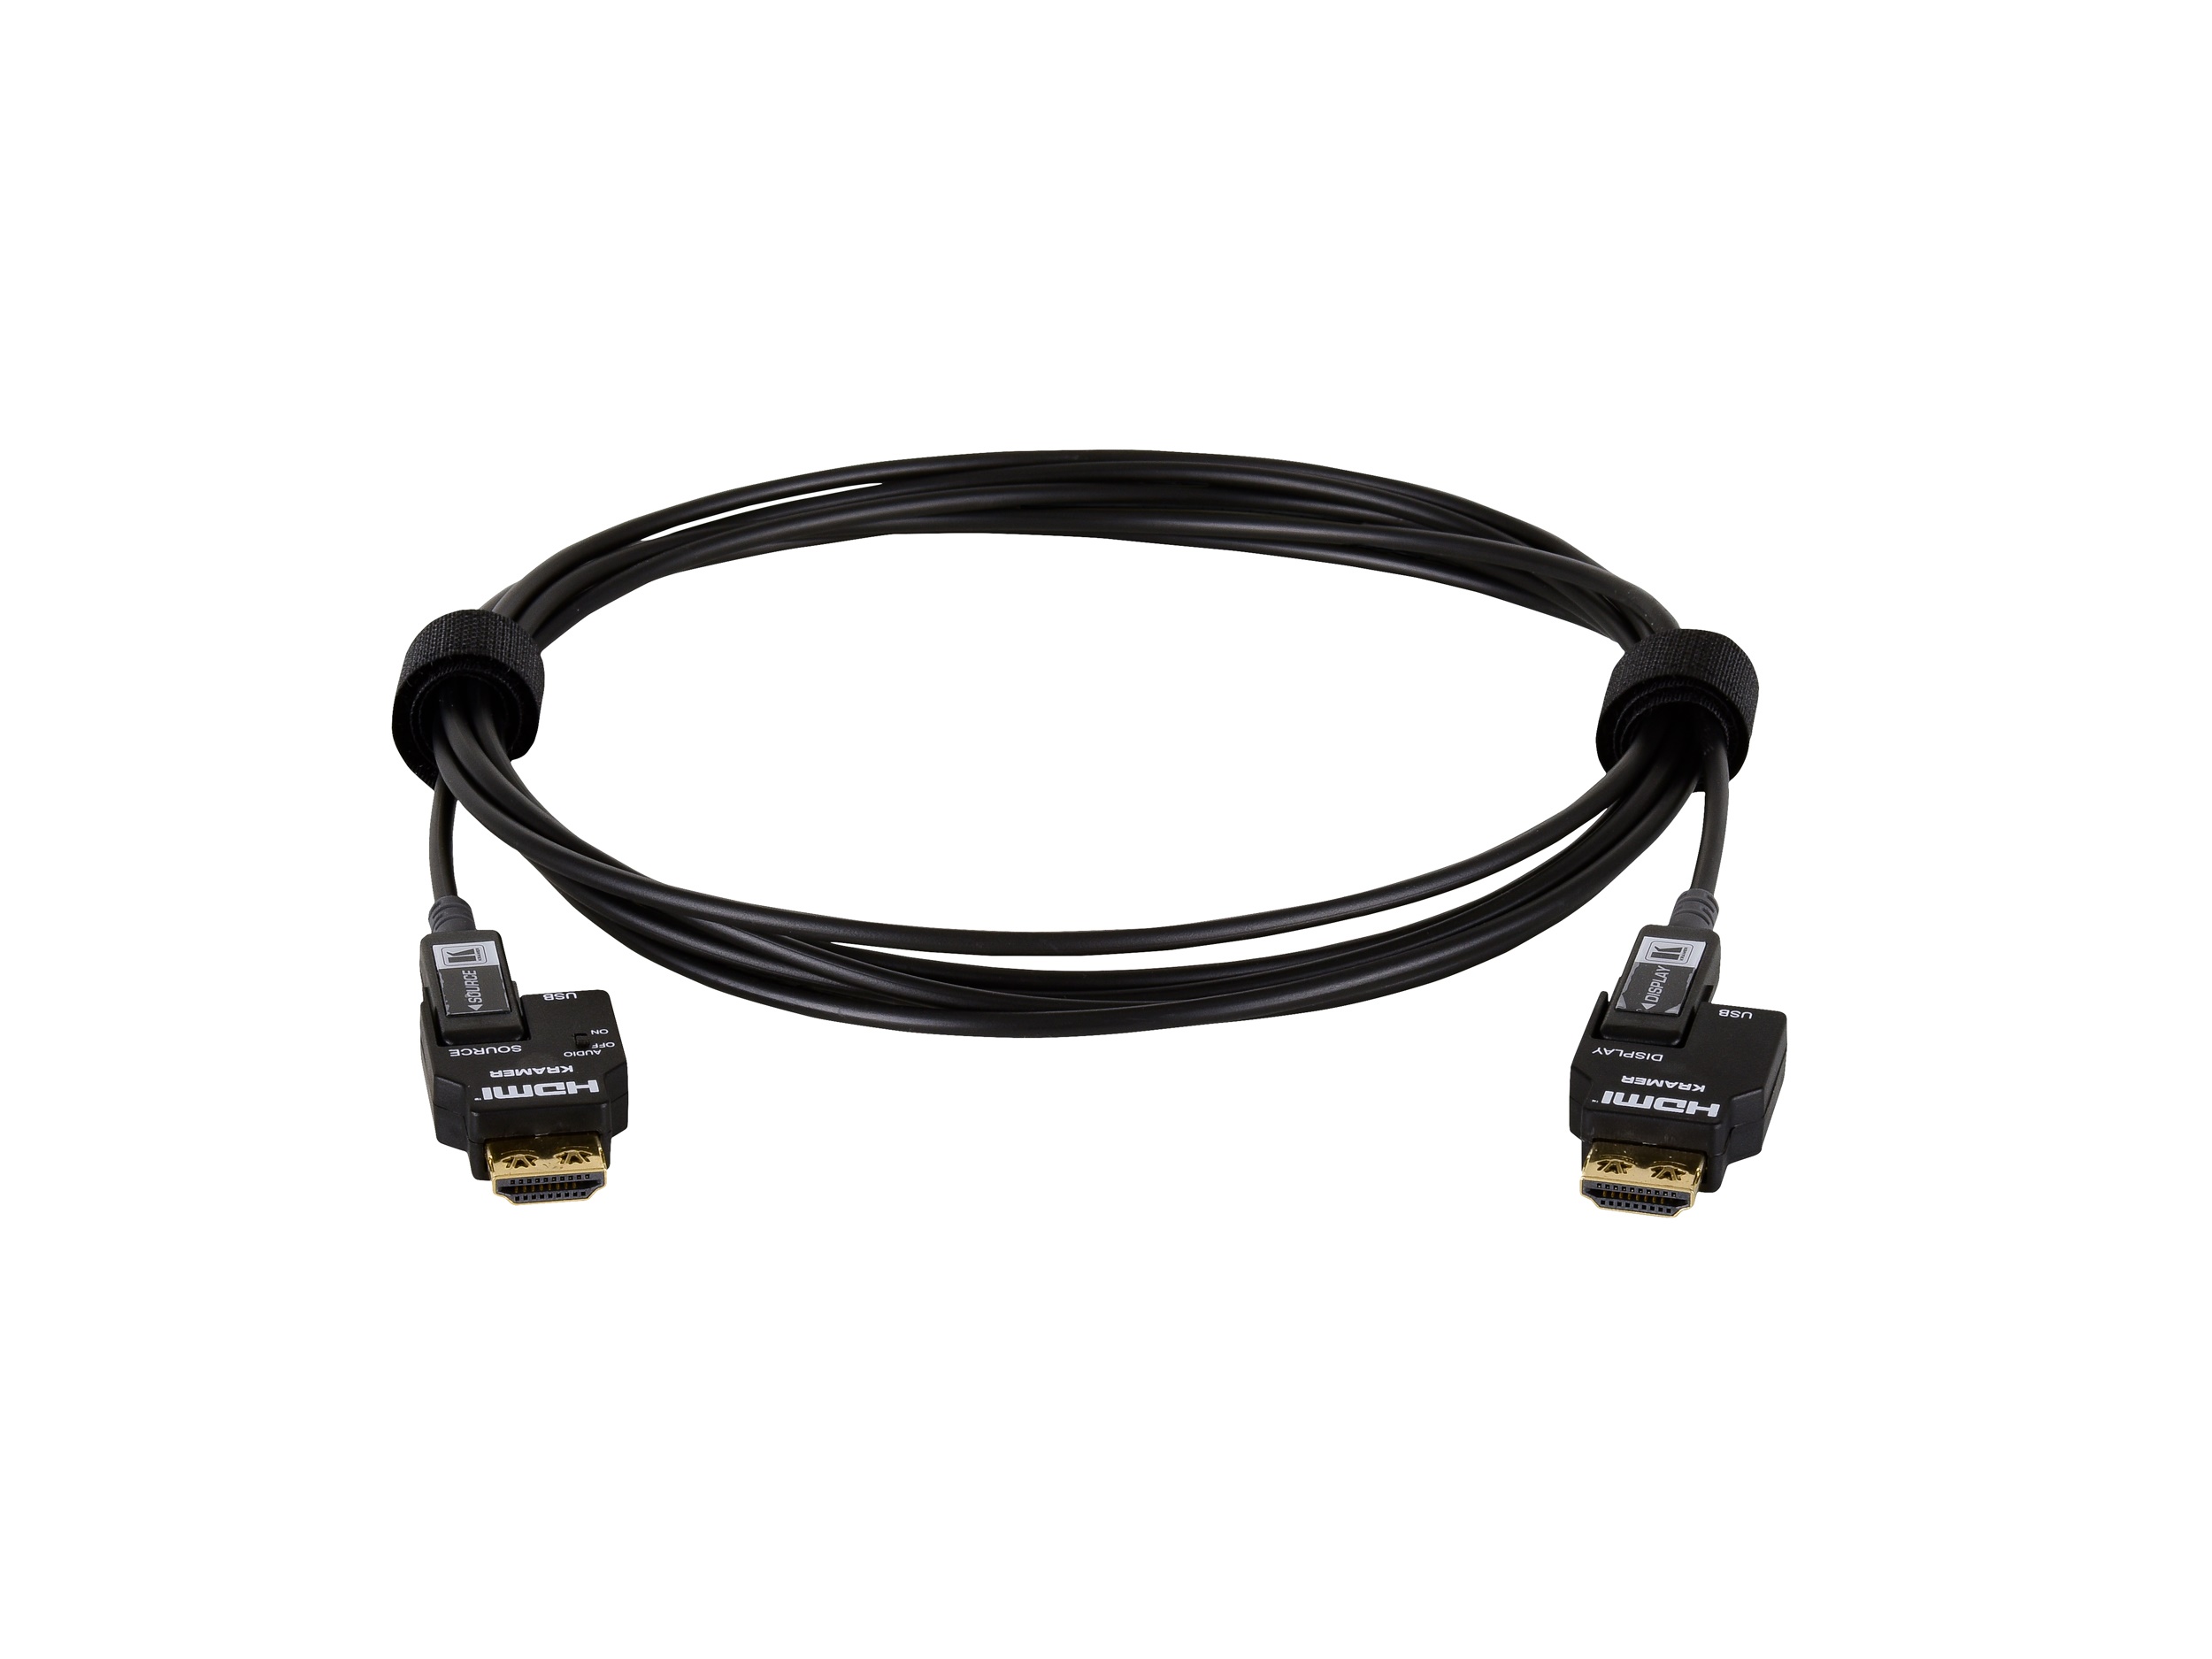 CRS-FIBERH-S1-6 1.8m/6ft 4K/60Hz (4x2x0) Secured Unidirectional 4K Pluggable HDMI Cable over Pure Fiber Cable by Kramer